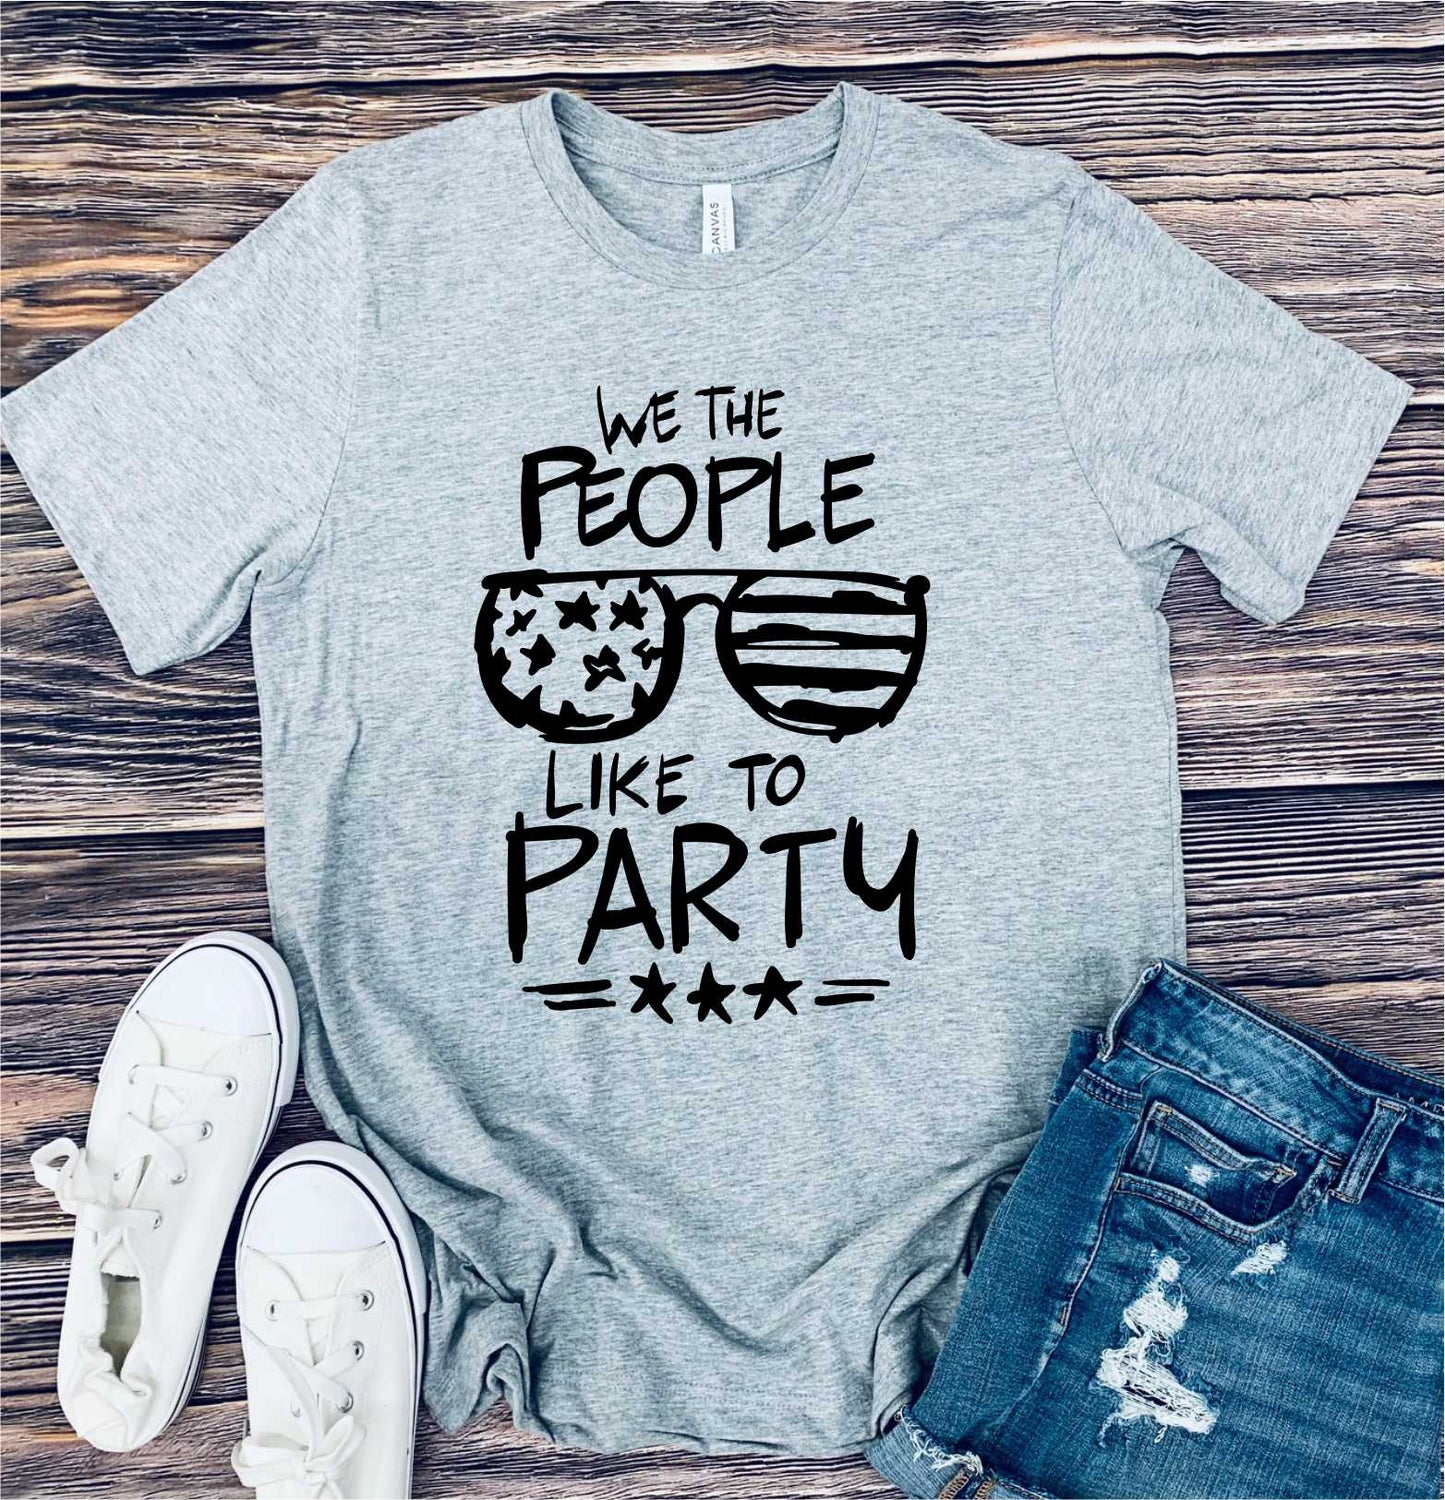 We like to Party Print